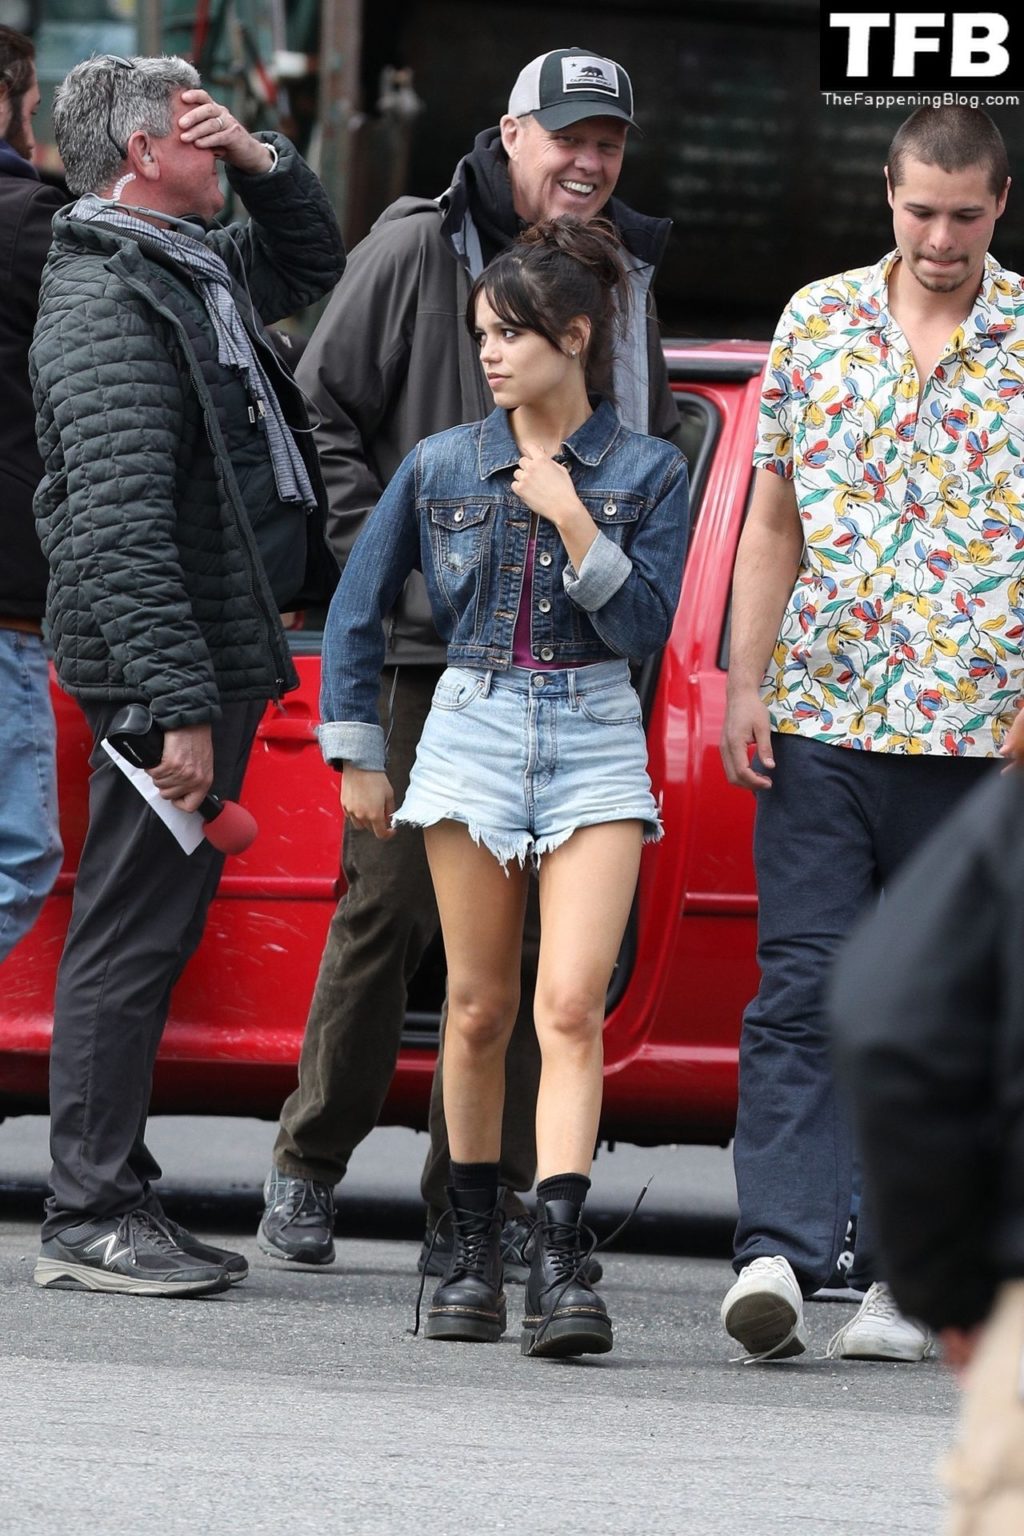 Jenna Ortega Sexy The Fappening Blog 9 1024x1536 - Leggy Jenna Ortega is Spotted in Short Shorts on the Set of “Finest Kind” (24 Photos)